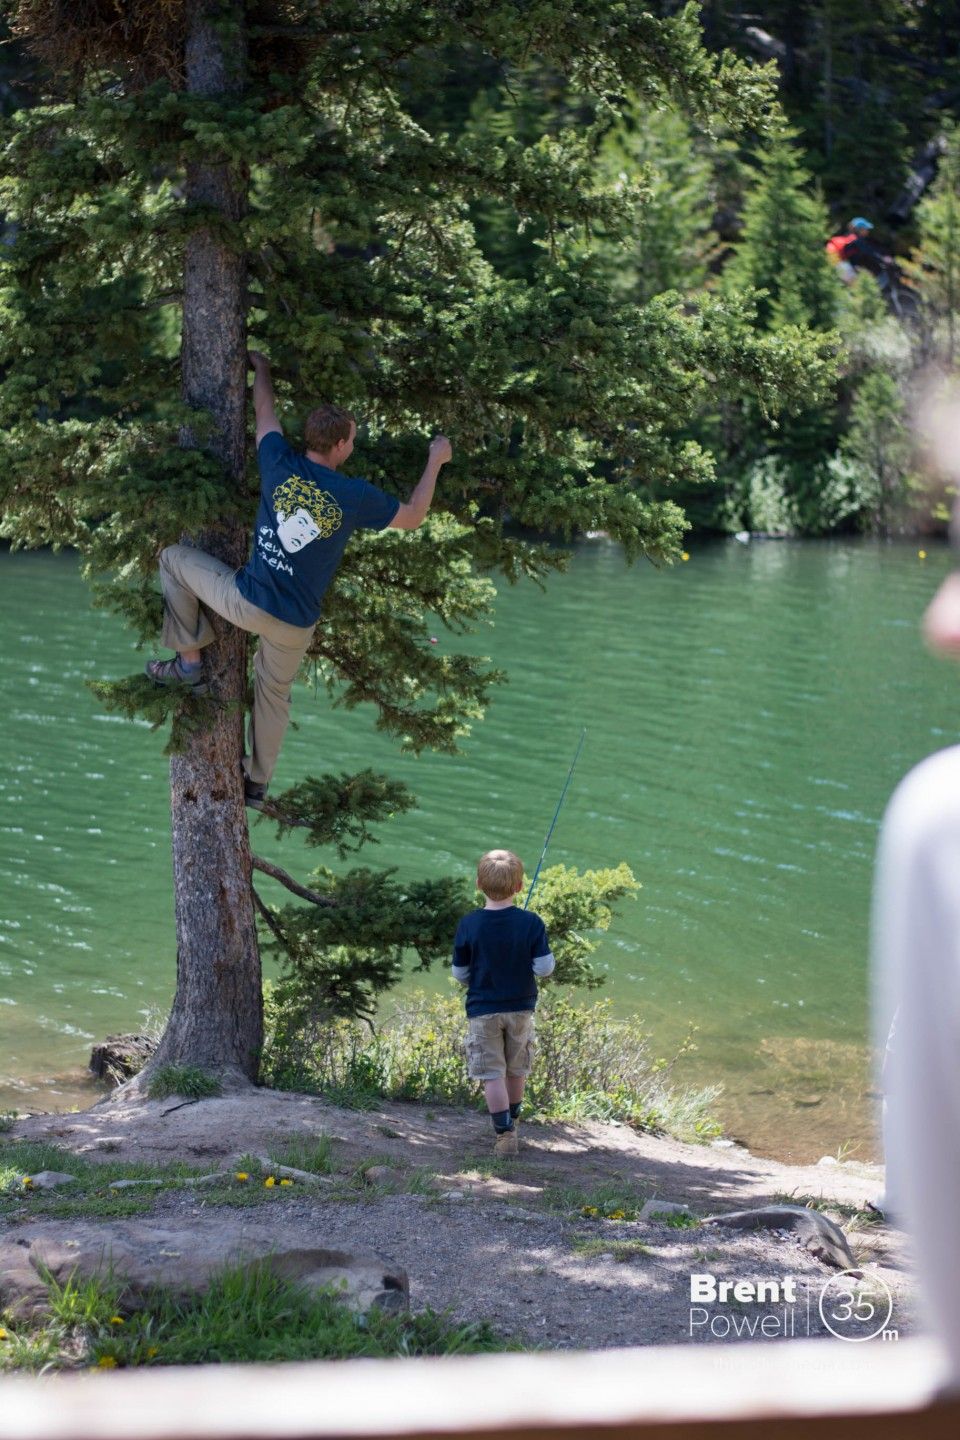 The things you have to do as a father, like remove fishing line from a tree.